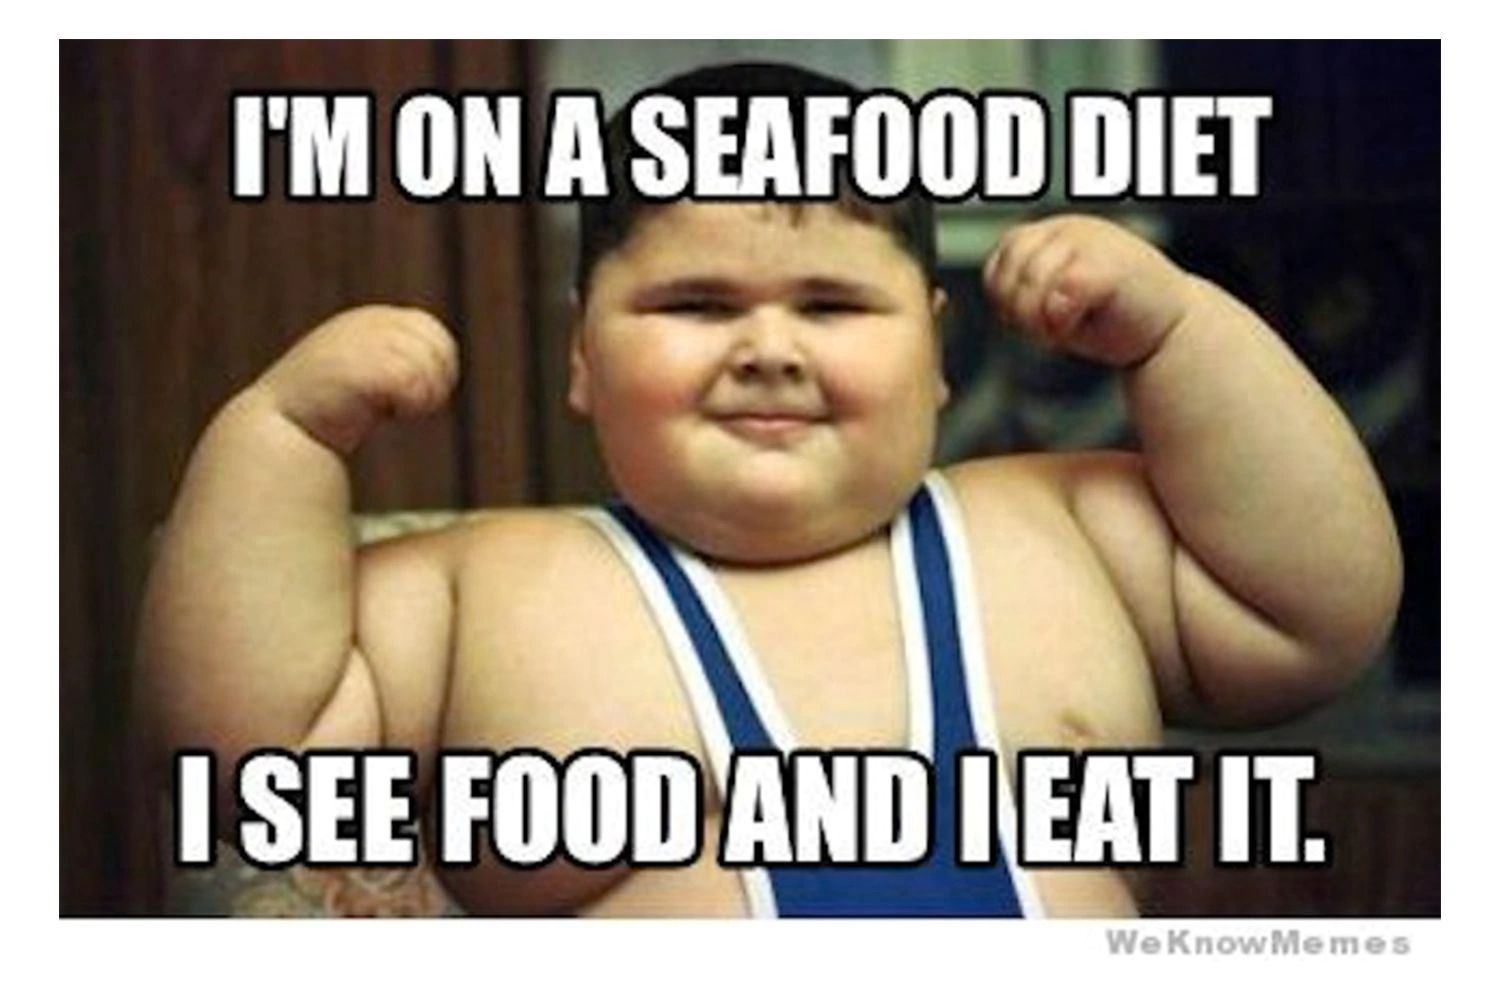 I'M ON A SEAFOOD DIET
I SEE FOOD AND IEAT IT.
We Know Memes